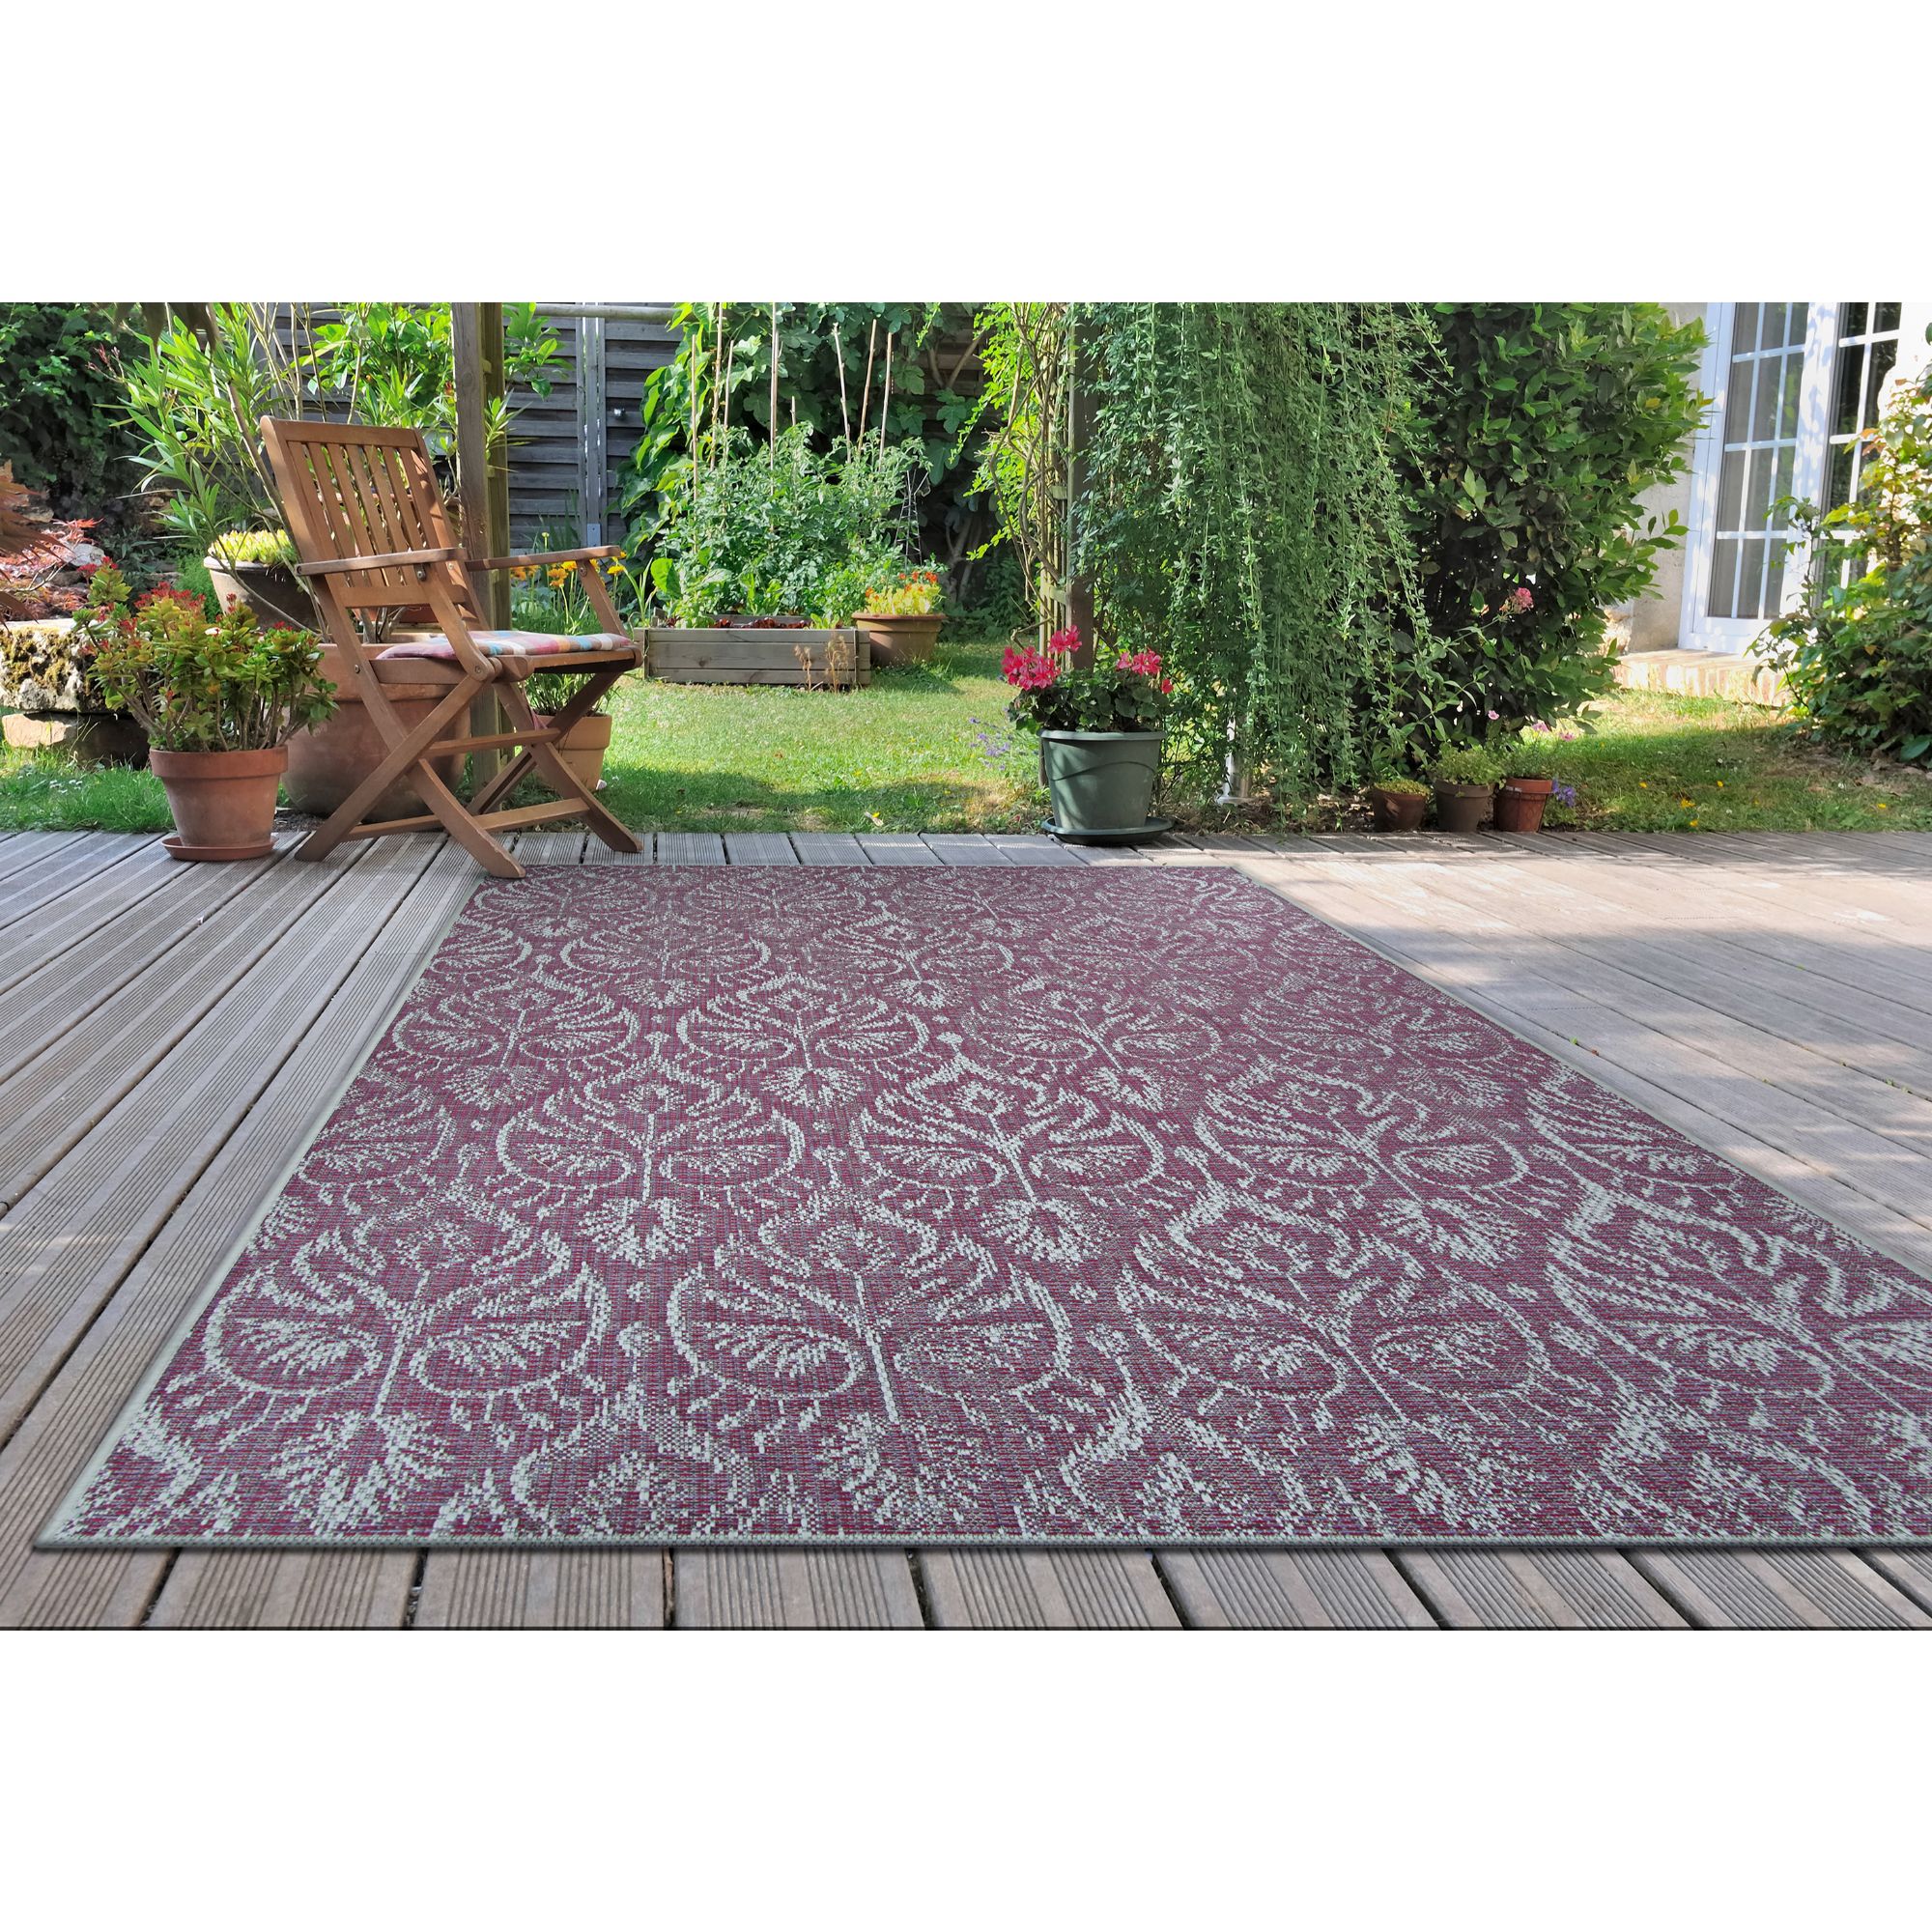 Couristan 5.25' x 7.5' Purple and Ivory Floral Rectangular Outdoor Area Throw Rug